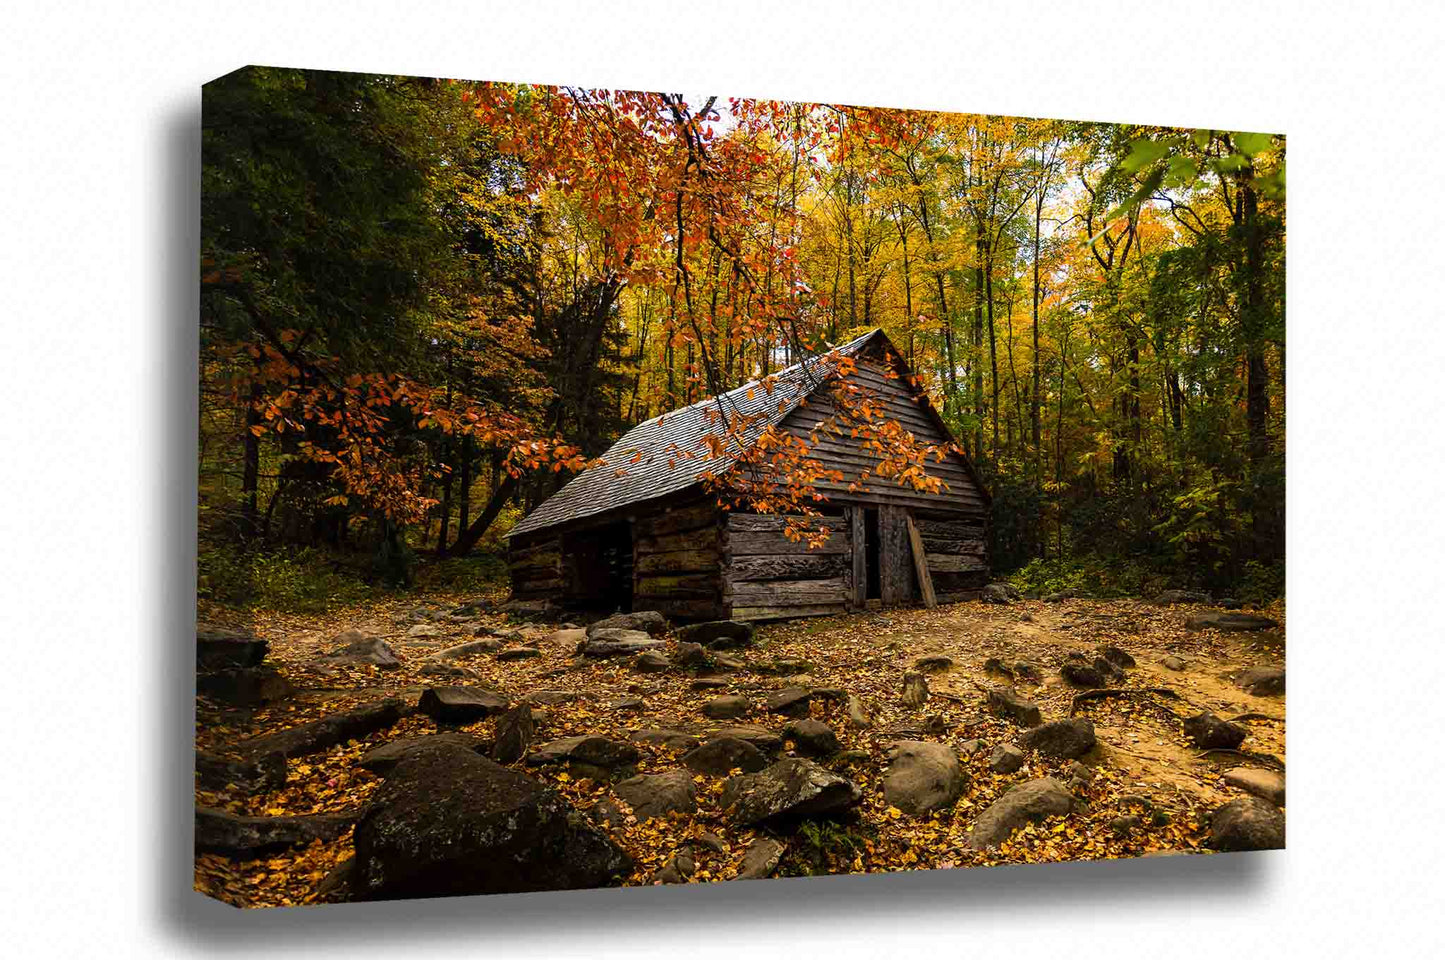 Country canvas wall art of an old barn surrounded by fall foliage on an autumn day at the Ogle Place in the Great Smoky Mountains near Gatlinburg, Tennessee by Sean Ramsey of Southern Plains Photography.